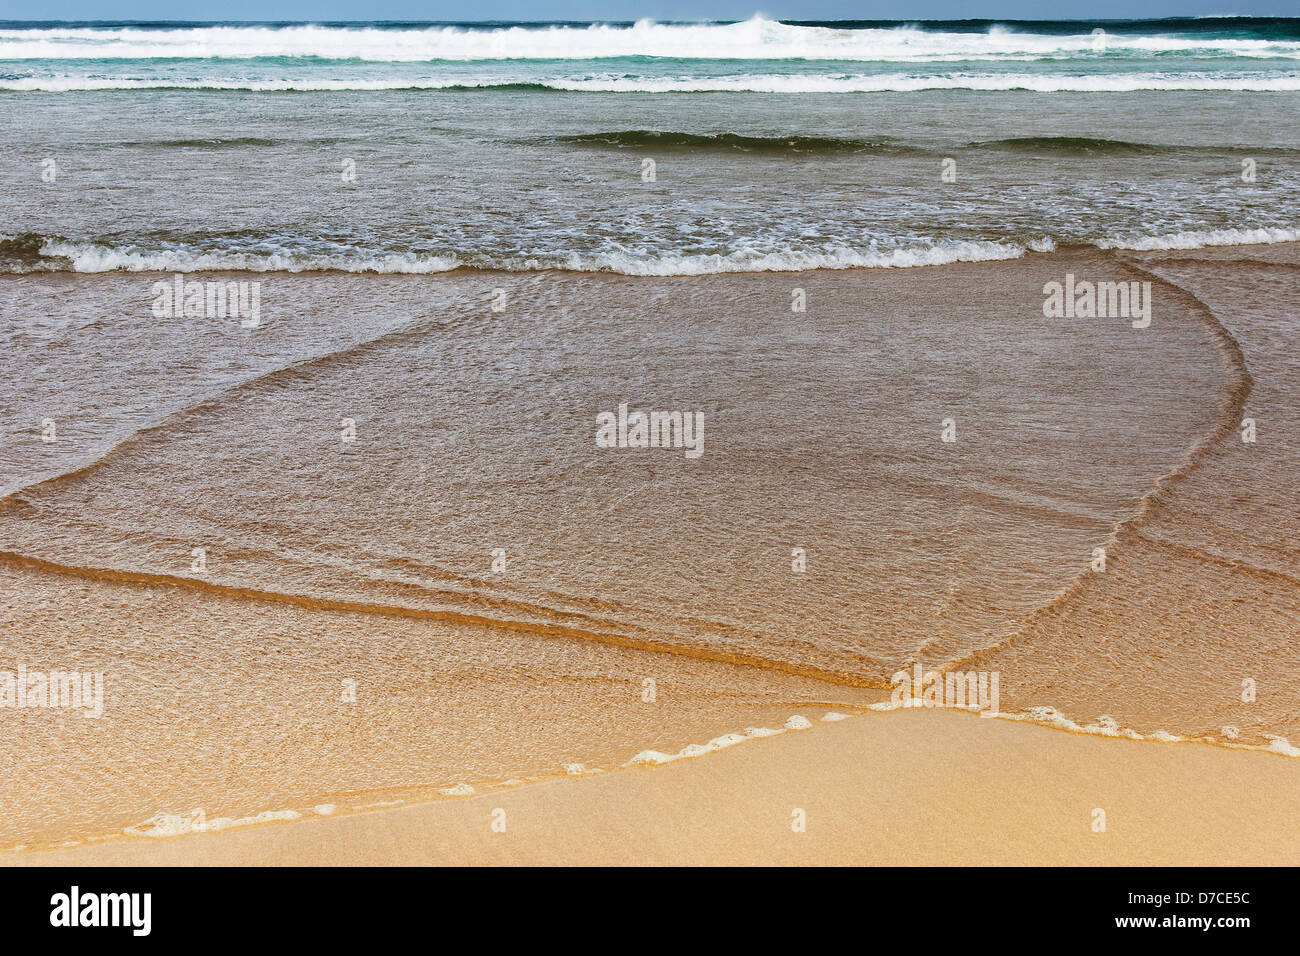 detail of the sand and sea water on a beach Stock Photo